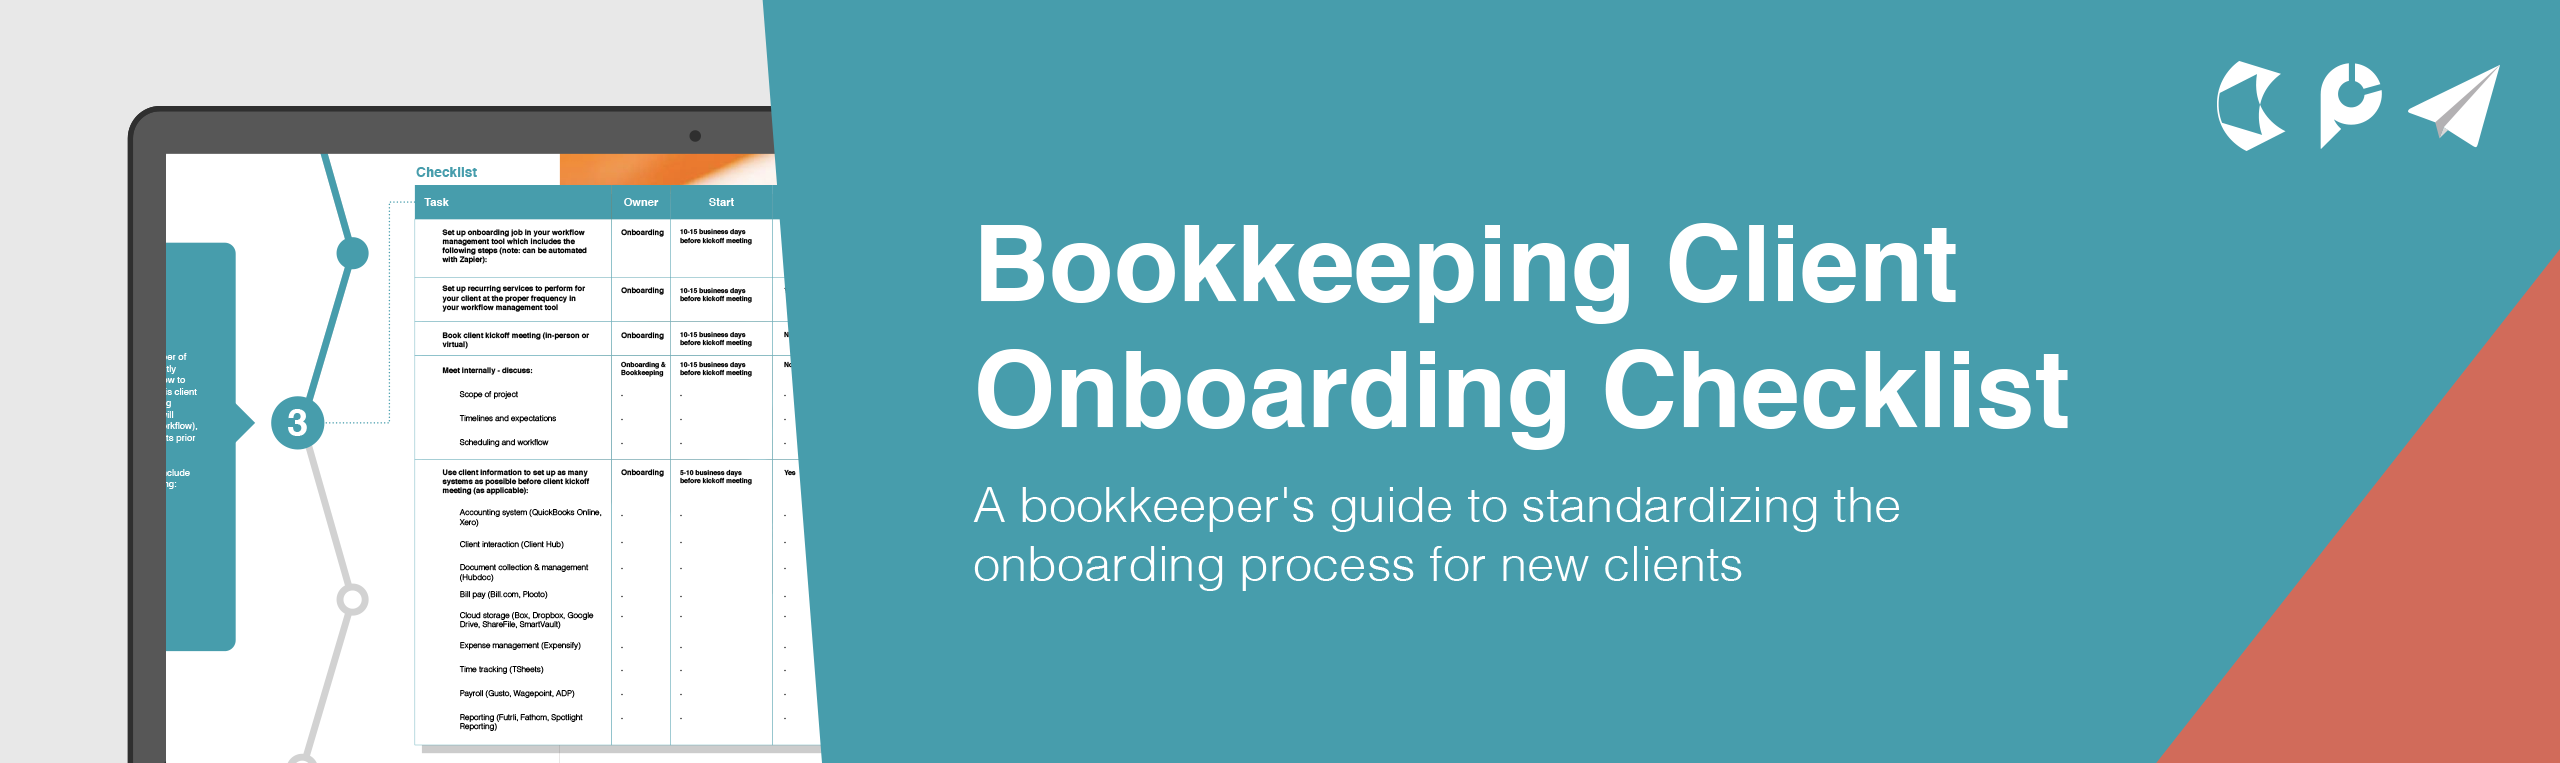 bookkeeping-client-onboarding-checklist